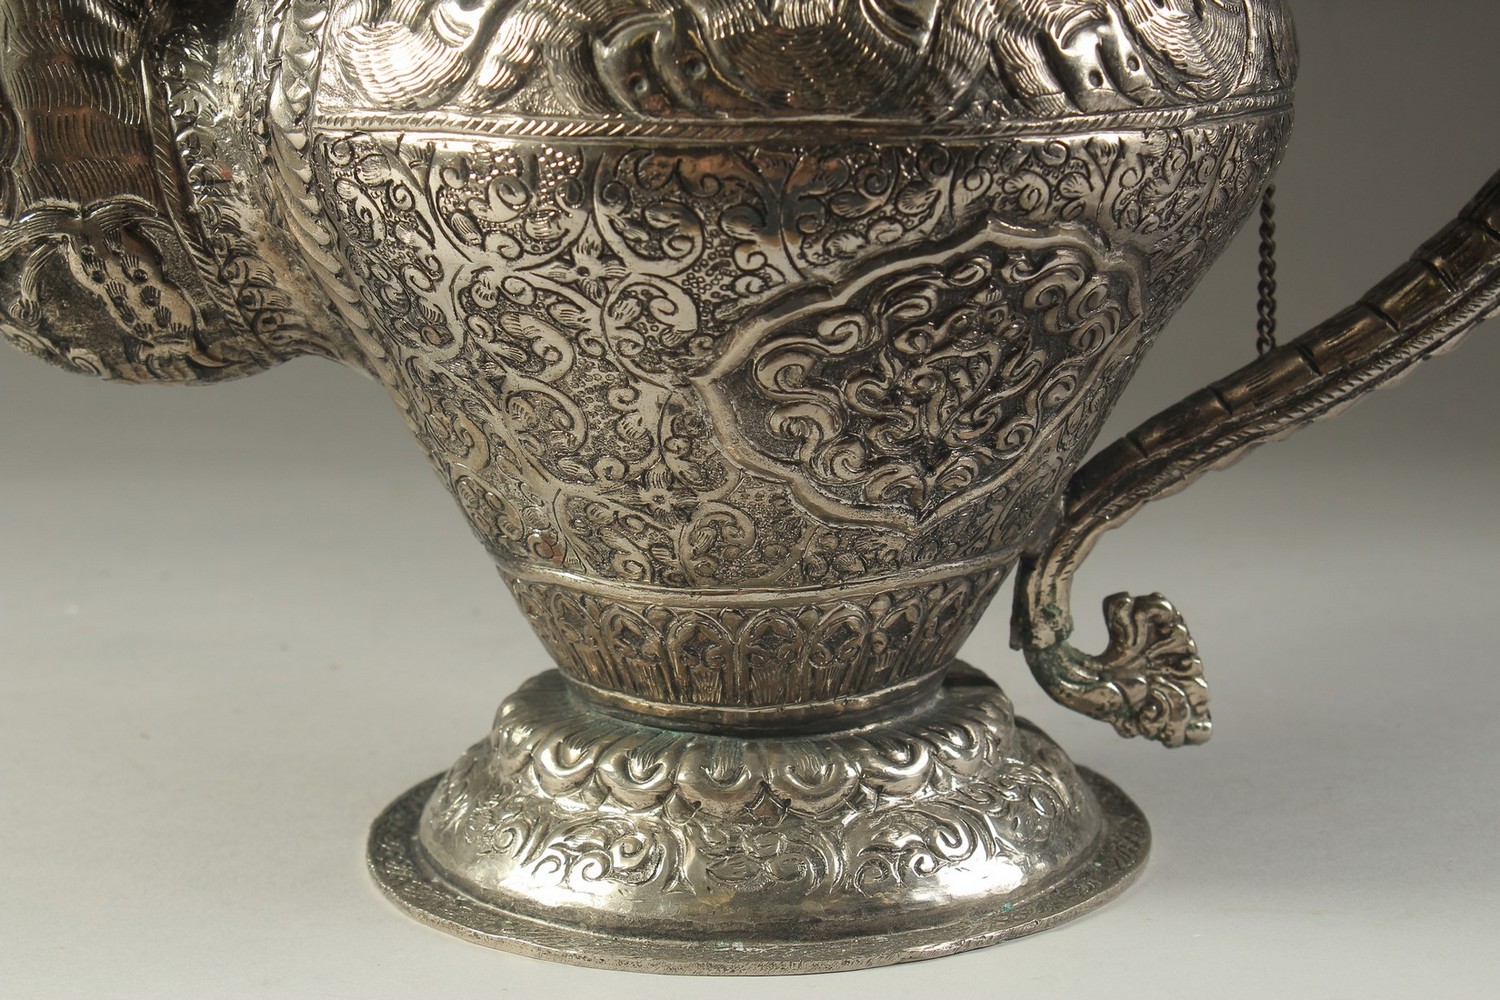 A LARGE CHINESE EMBOSSED AND ENGRAVED WHITE METAL LIDDED JUG, possibly low grade silver, decorated - Image 5 of 14